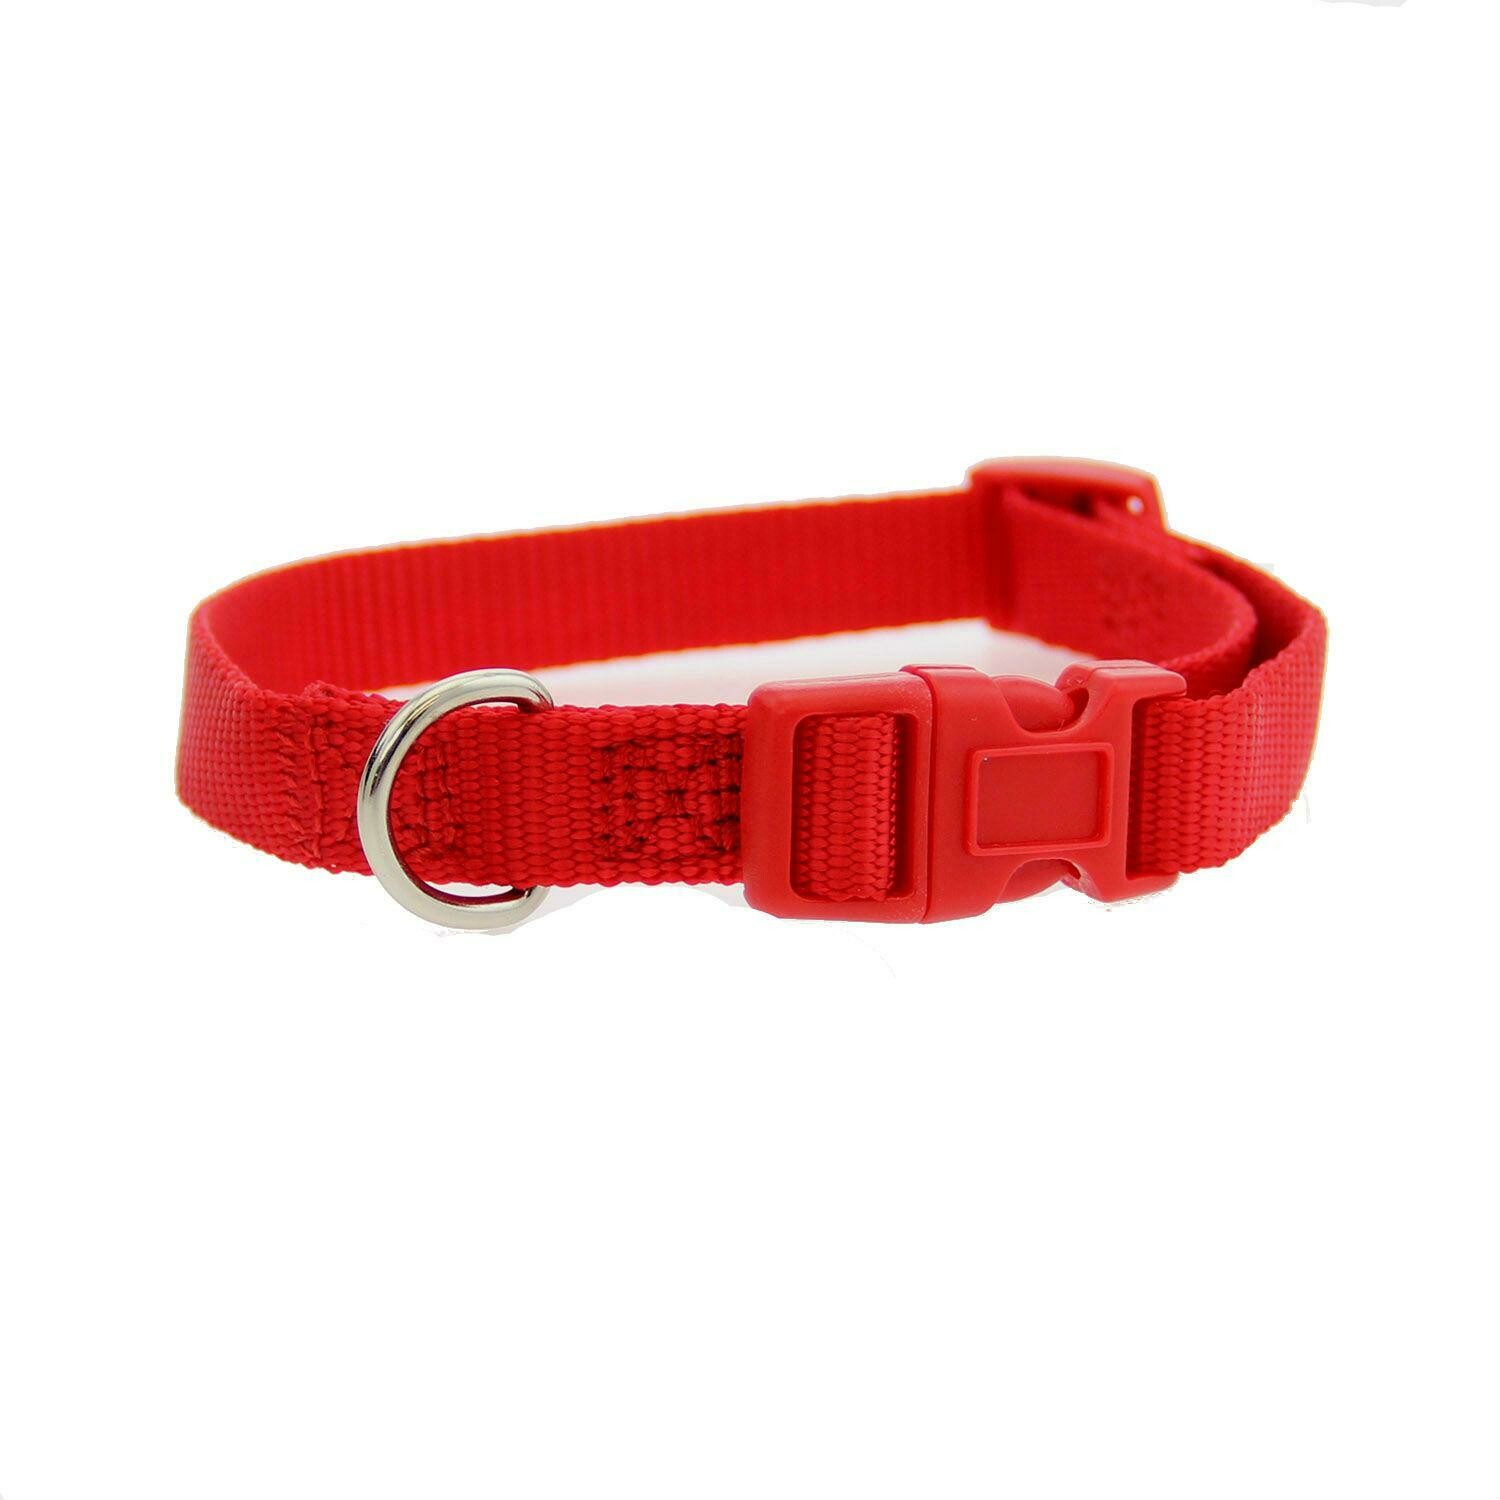 Casual Canine Nylon Dog Collar - Red